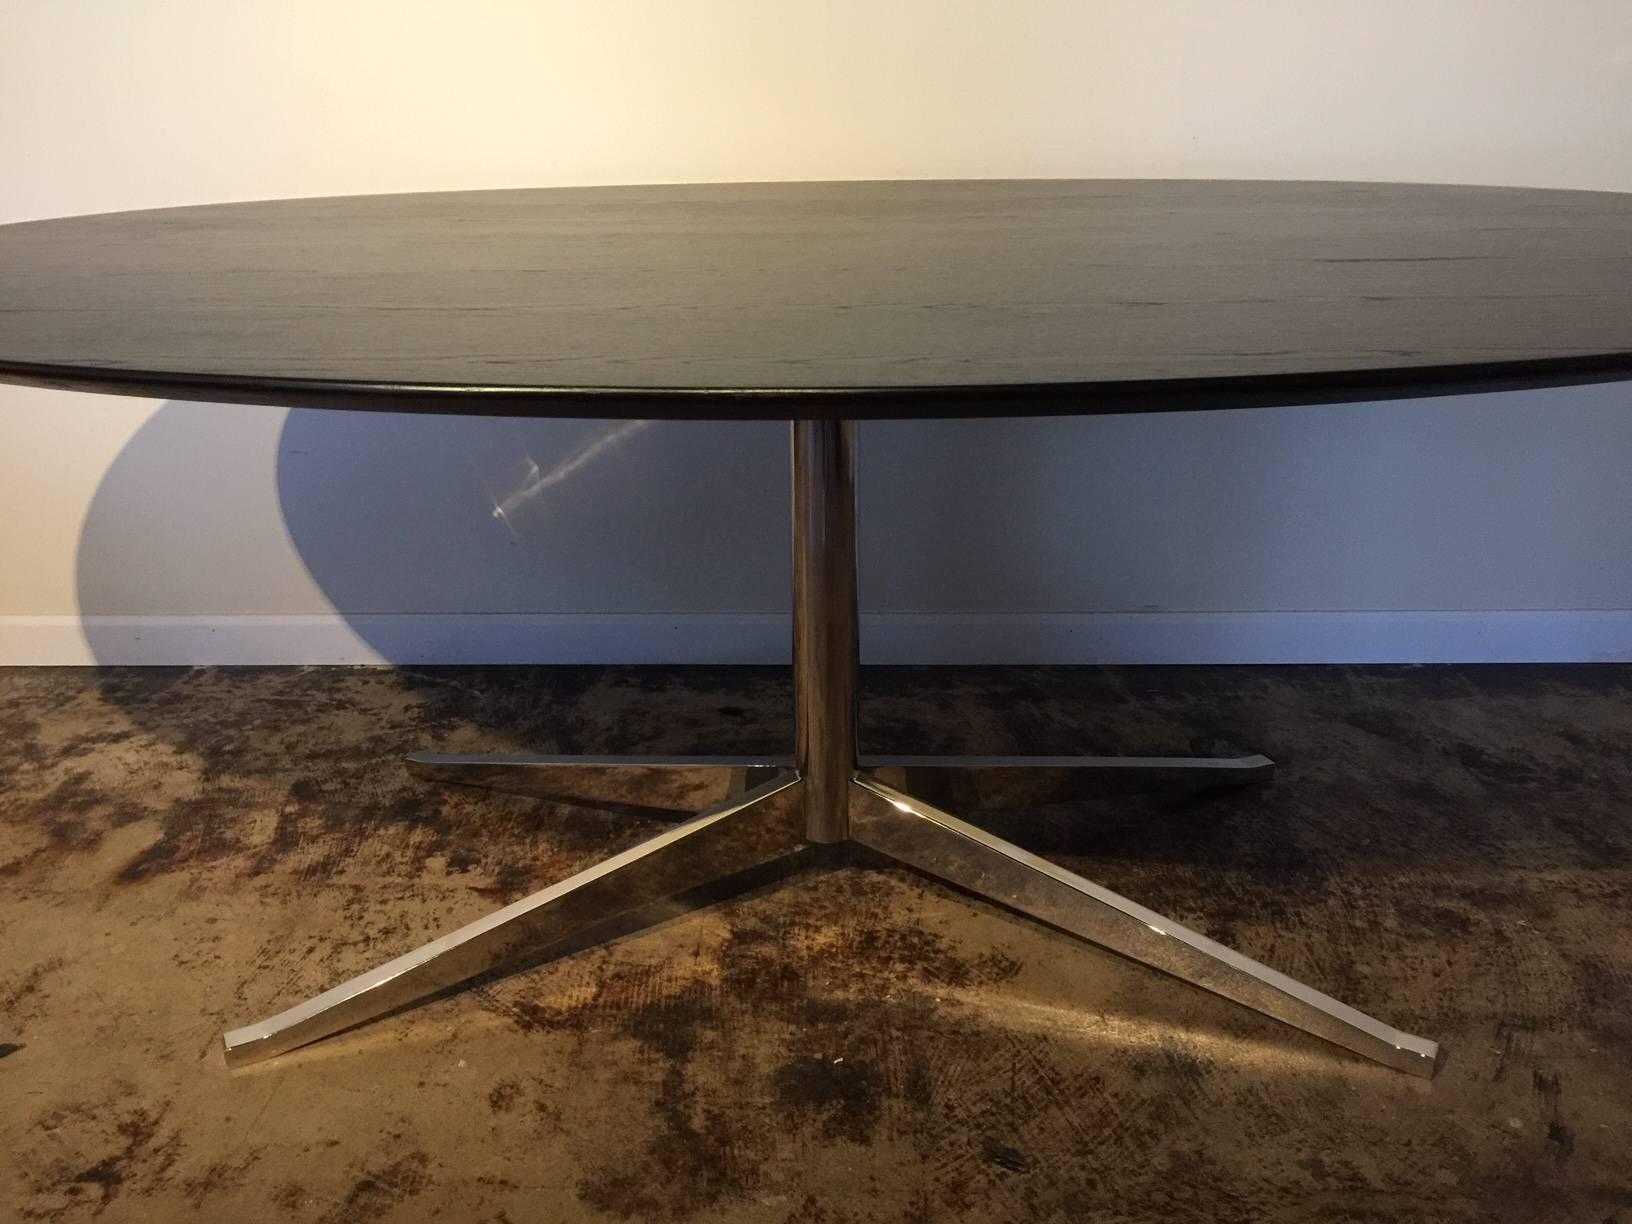 Florence Knoll elliptical dining or conference table; Designed in 1961
on metal pedestal base splaying to four feet; The underside of the top has a deep knife-edge bevel creating a slender profile. Like all of Florence Knoll's designs, it is